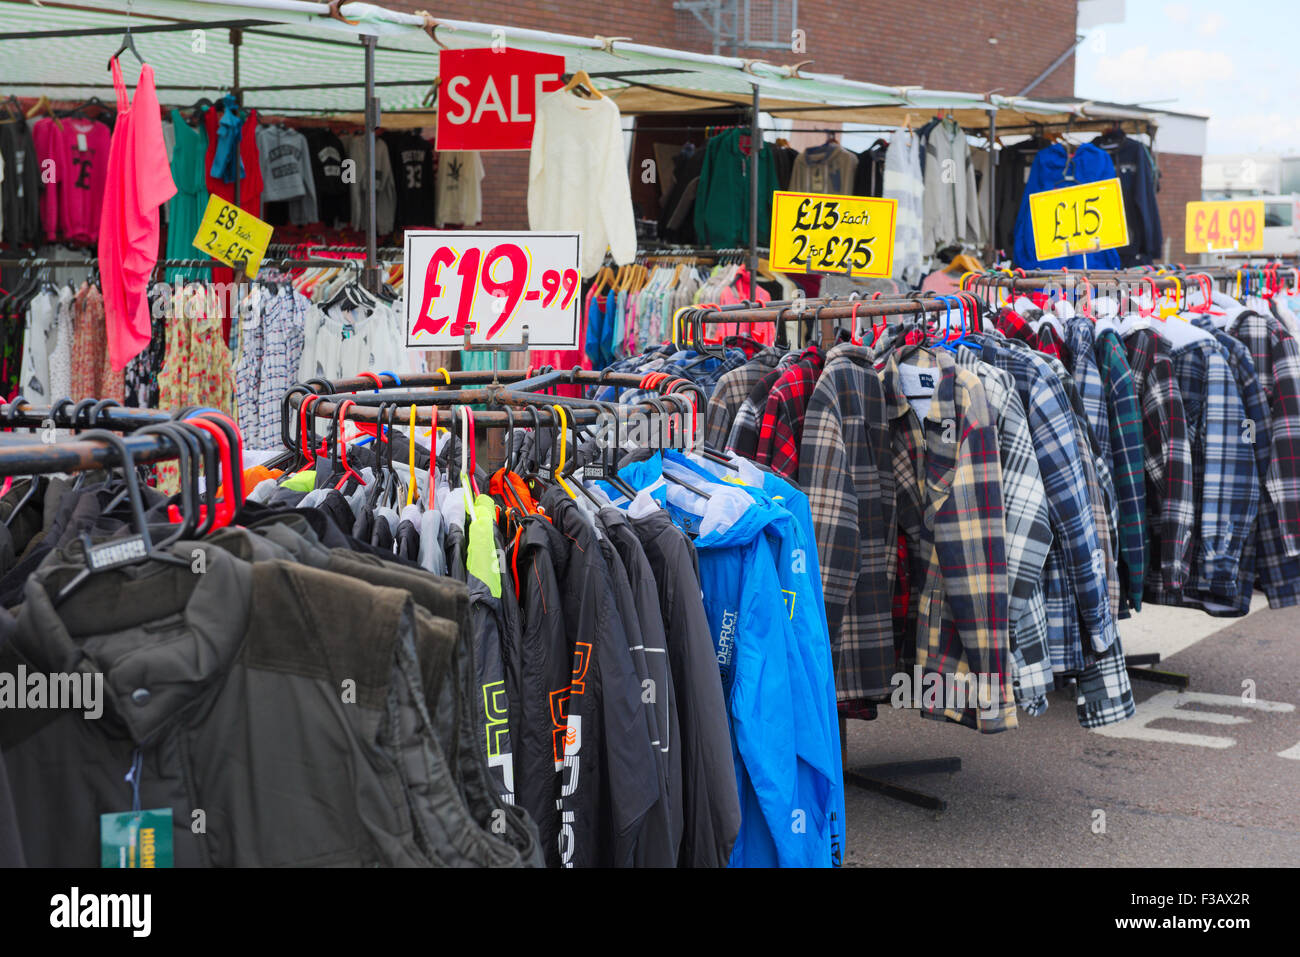 Clothing for sale at a market stall in Bristol, UK Stock Photo